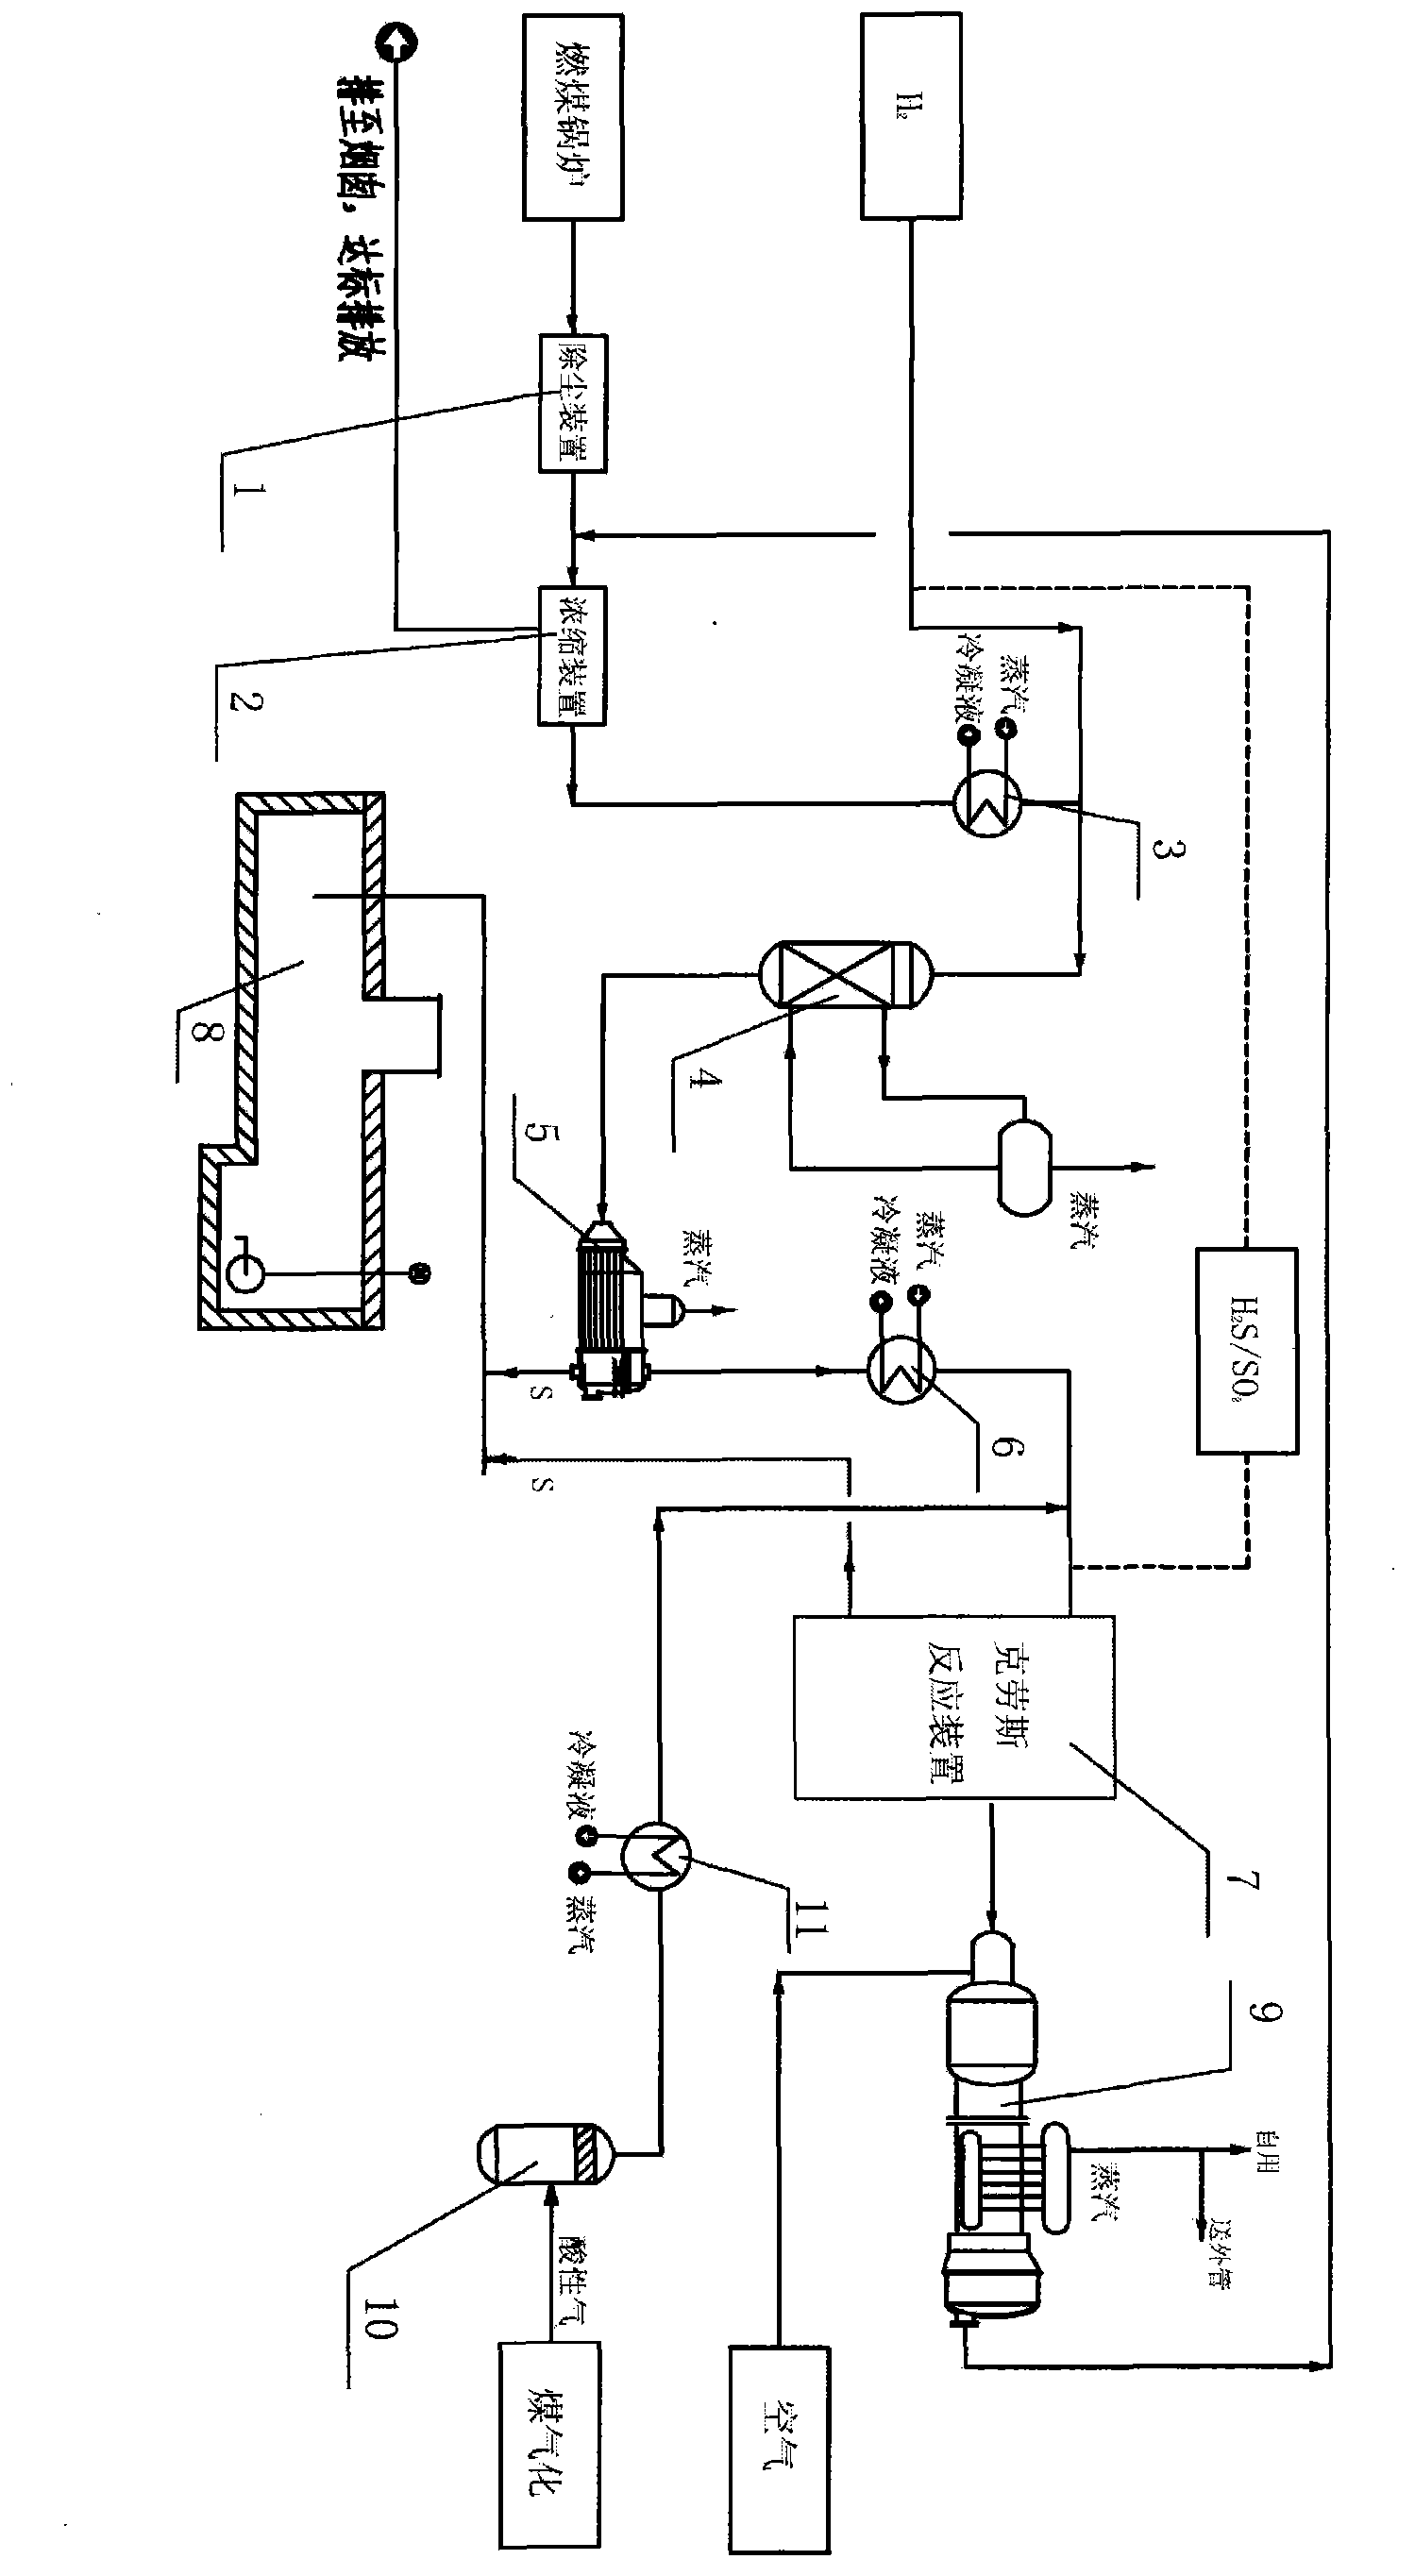 Method for obtaining sulfur from sulfur compounds in coal chemical plant and electric power plant